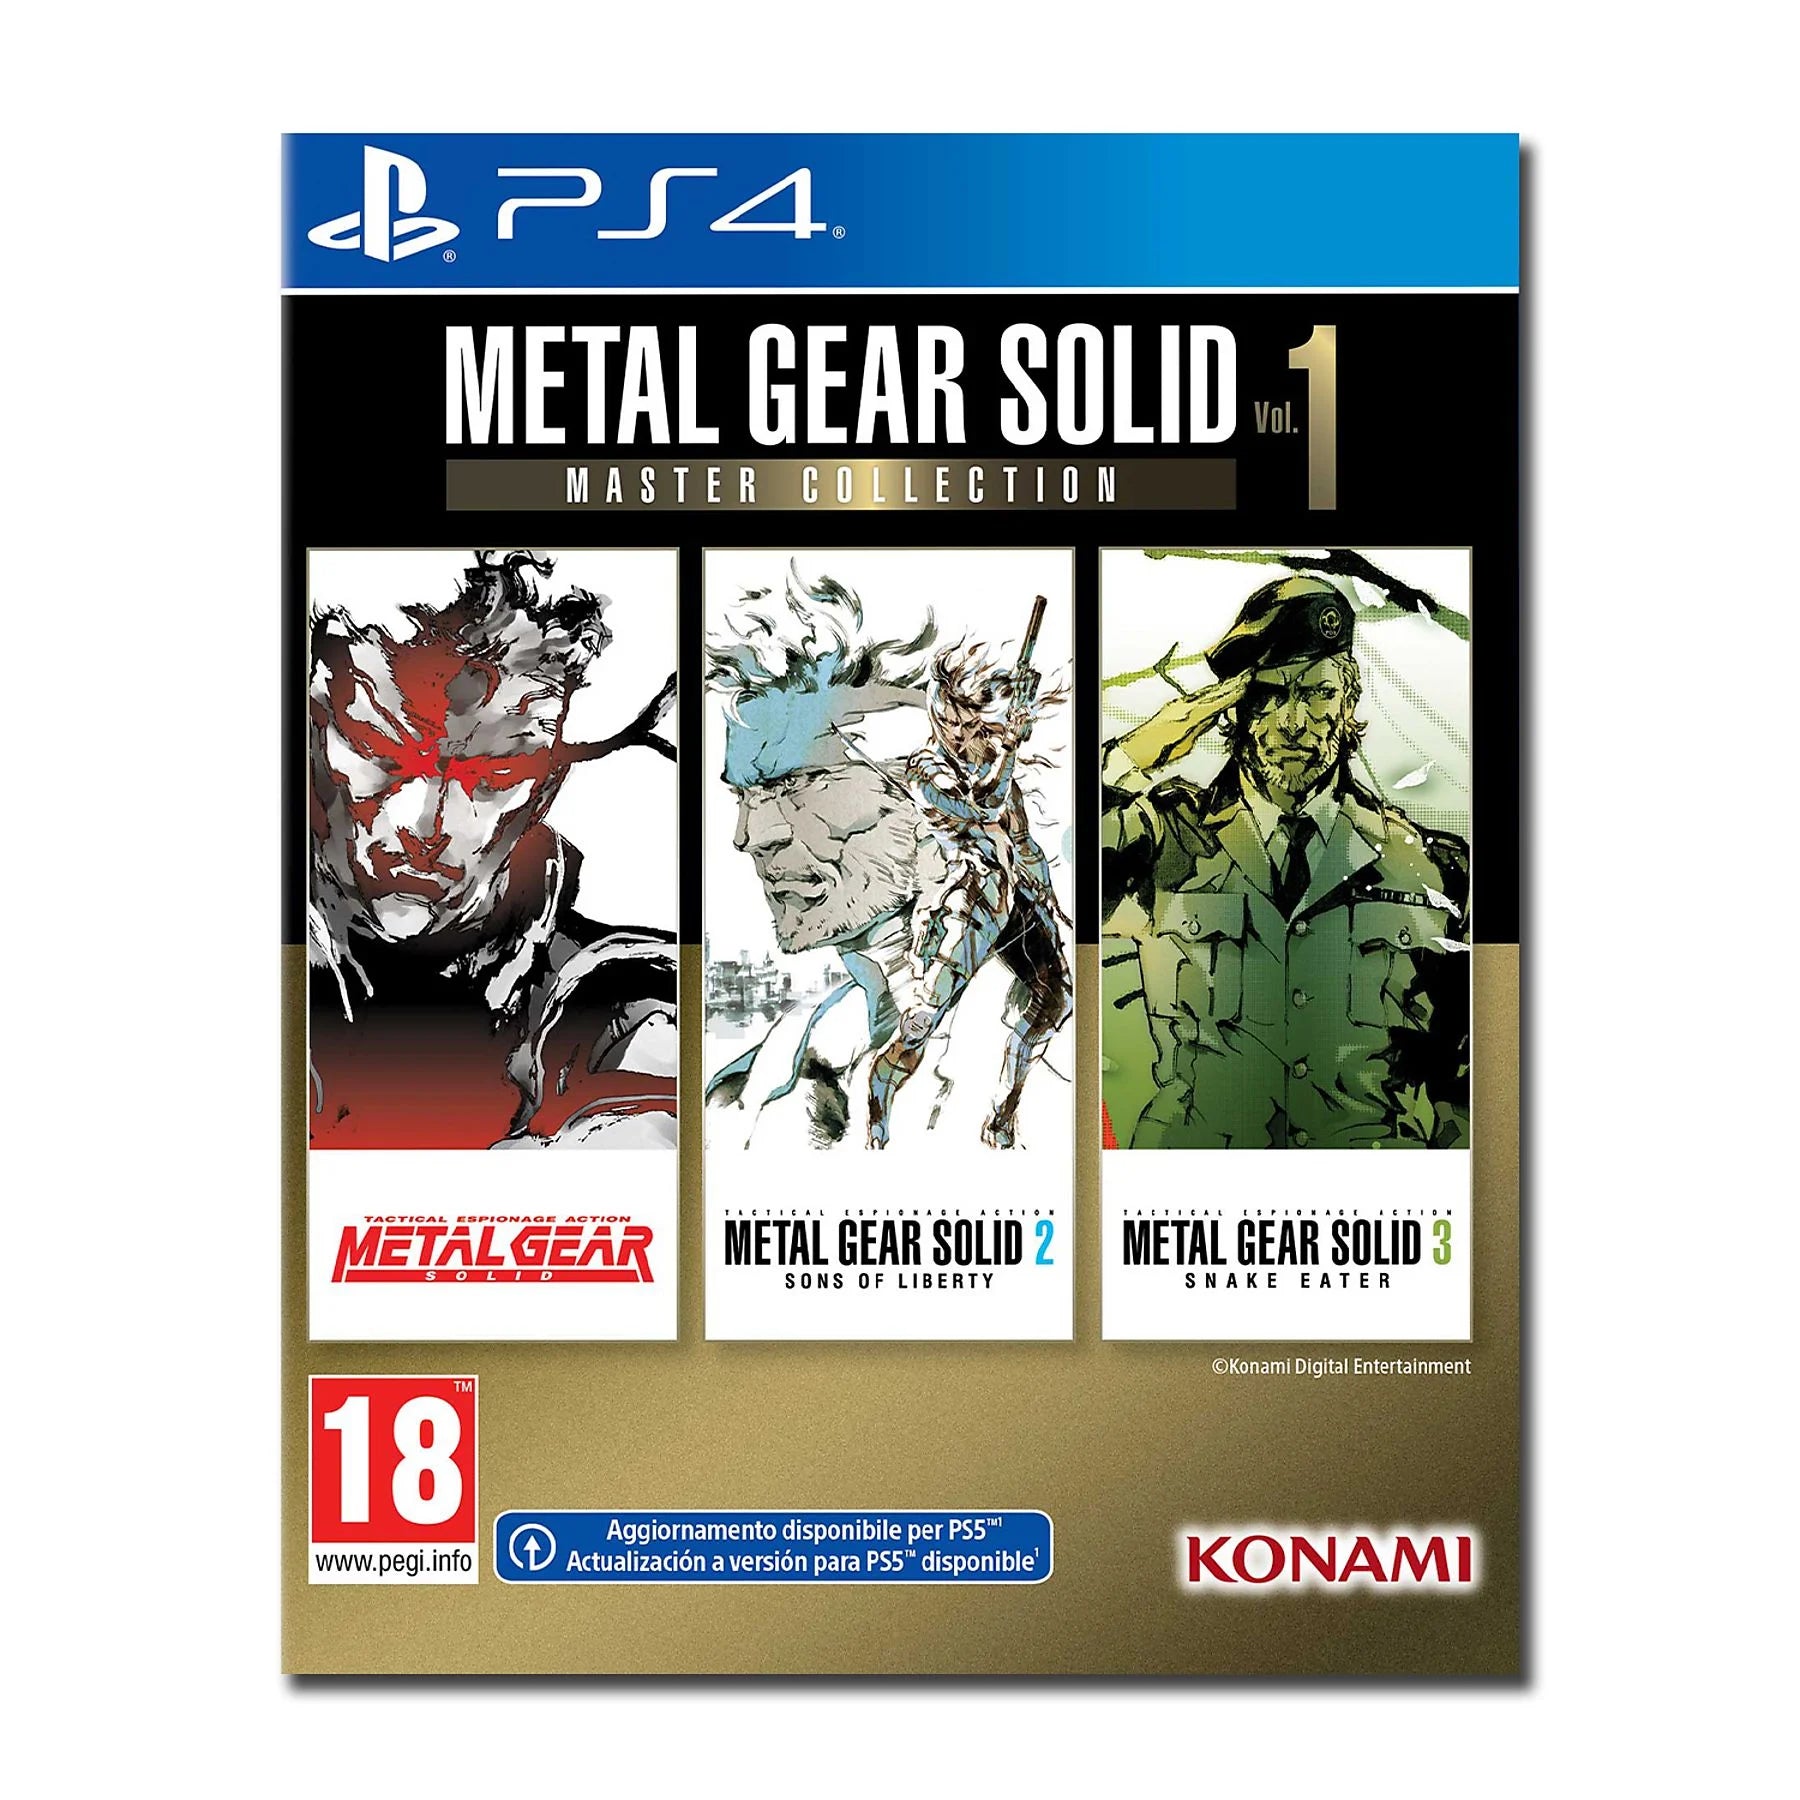 PS4 METAL GEAR SOLID MASTER COLLECTION VOL. 1